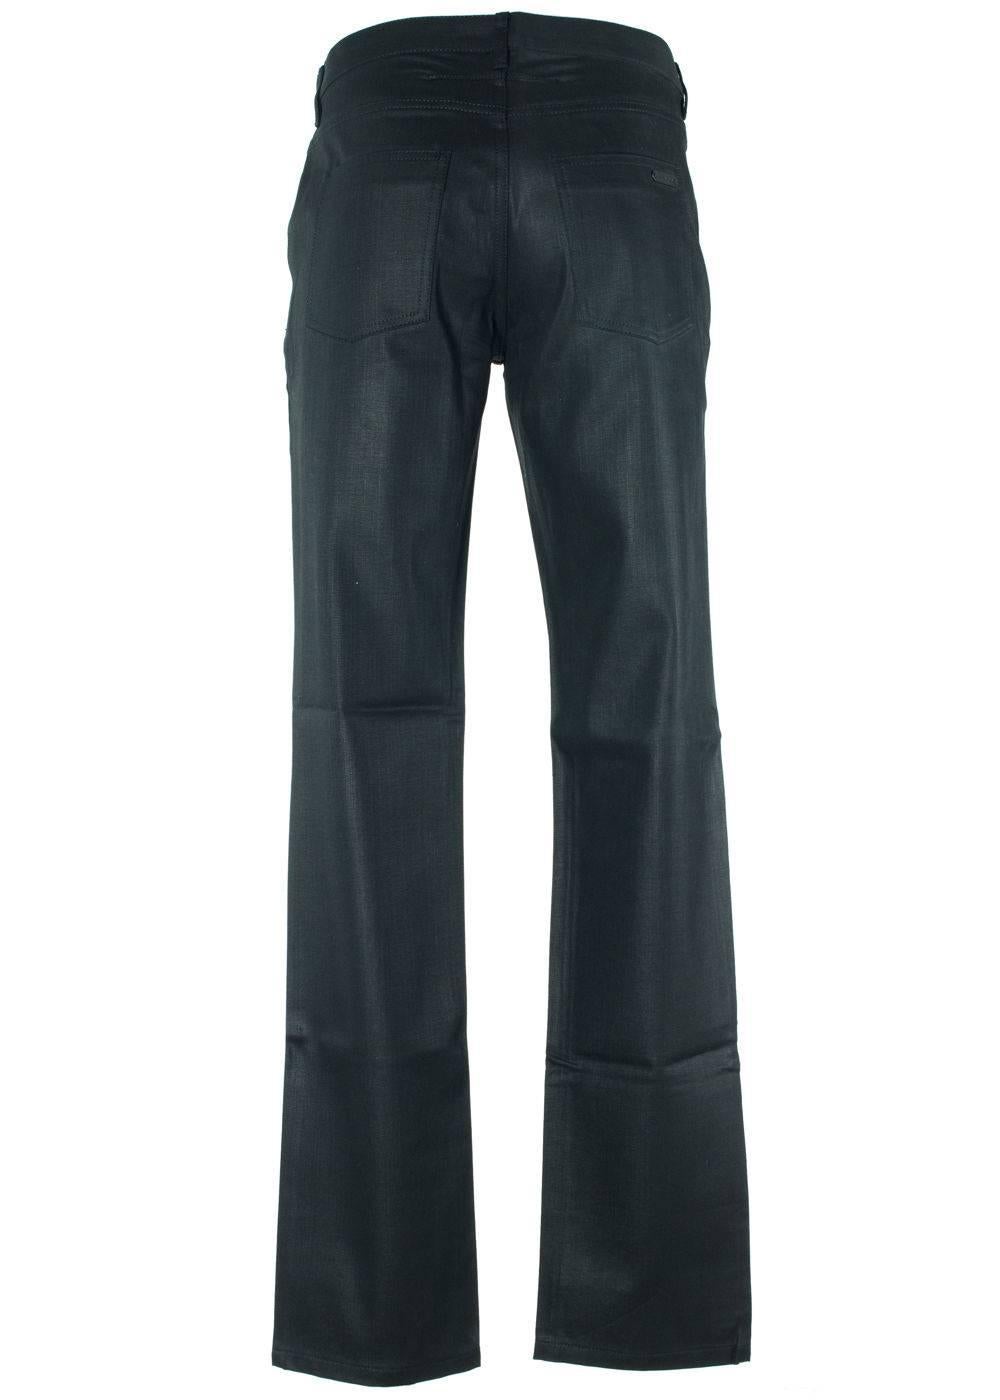 Brand New Givenchy Men's Jeans
Original Tag
Retails in Stores & Online for $510
Men's Size US 32 Fits True to Size

Classic black jeans from fashion house Givenchy. The jeans are made of 100% cotton making it breathable and soft to the skin. These